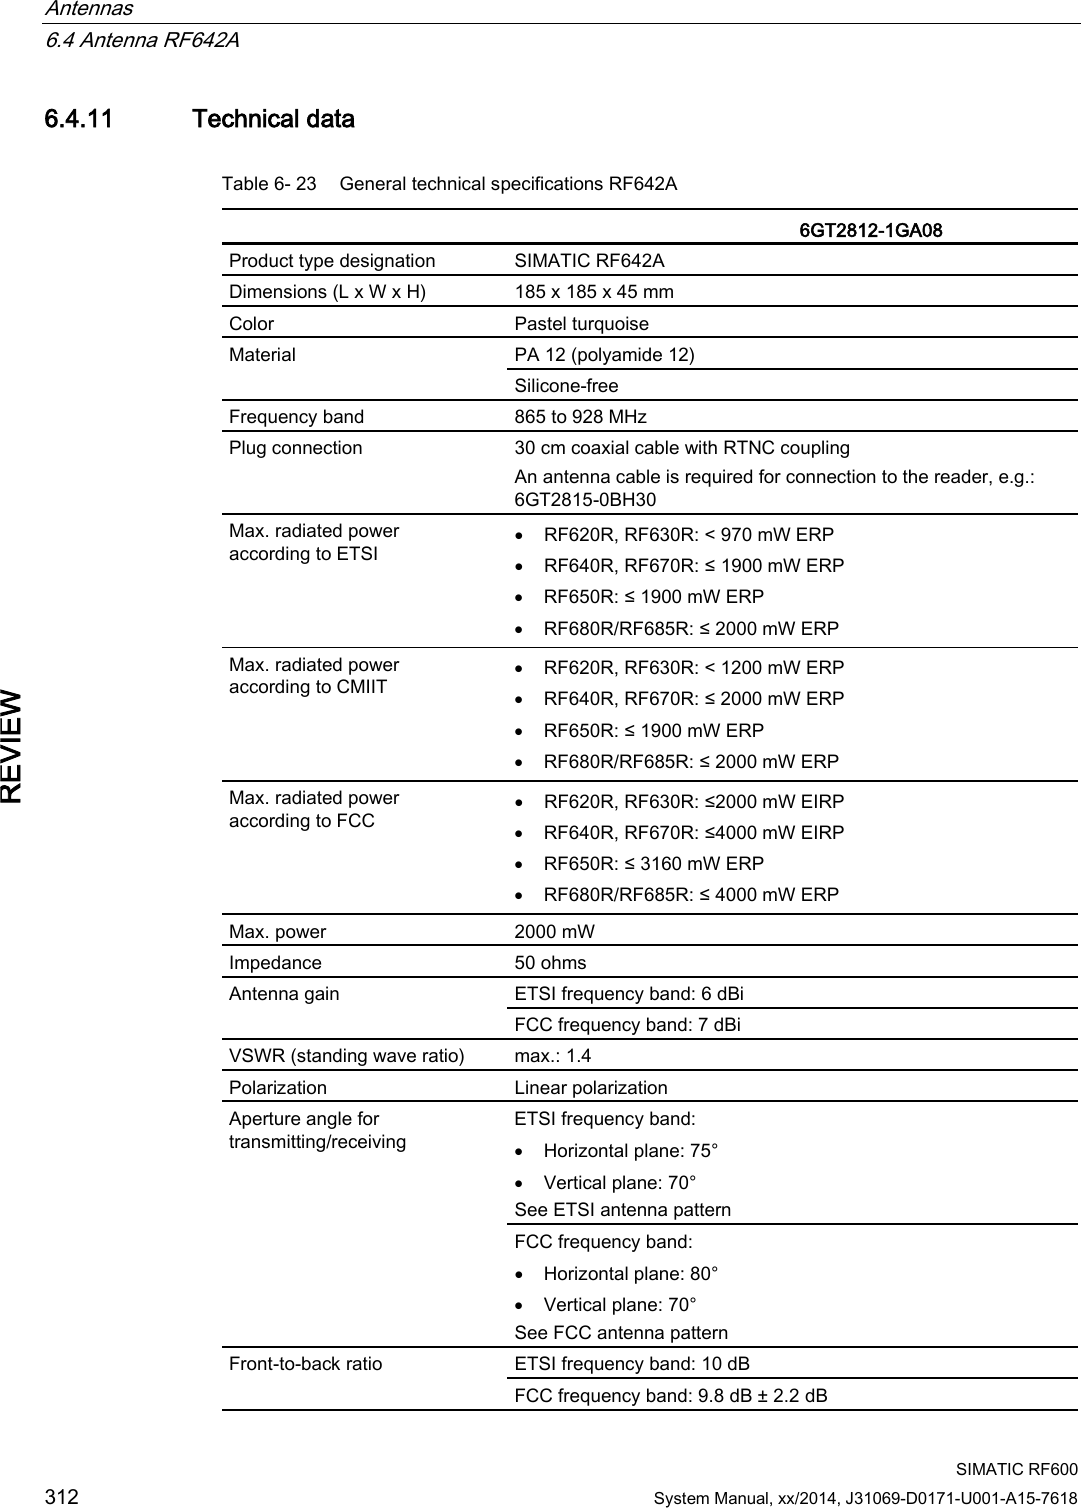 Antennas   6.4 Antenna RF642A  SIMATIC RF600 312 System Manual, xx/2014, J31069-D0171-U001-A15-7618 REVIEW 6.4.11 Technical data Table 6- 23 General technical specifications RF642A   6GT2812-1GA08 Product type designation SIMATIC RF642A Dimensions (L x W x H) 185 x 185 x 45 mm Color Pastel turquoise Material PA 12 (polyamide 12) Silicone-free Frequency band 865 to 928 MHz Plug connection 30 cm coaxial cable with RTNC coupling An antenna cable is required for connection to the reader, e.g.: 6GT2815-0BH30 Max. radiated power according to ETSI • RF620R, RF630R: &lt; 970 mW ERP • RF640R, RF670R: ≤ 1900 mW ERP • RF650R: ≤ 1900 mW ERP • RF680R/RF685R: ≤ 2000 mW ERP Max. radiated power according to CMIIT • RF620R, RF630R: &lt; 1200 mW ERP • RF640R, RF670R: ≤ 2000 mW ERP • RF650R: ≤ 1900 mW ERP • RF680R/RF685R: ≤ 2000 mW ERP Max. radiated power according to FCC • RF620R, RF630R: ≤2000 mW EIRP • RF640R, RF670R: ≤4000 mW EIRP • RF650R: ≤ 3160 mW ERP • RF680R/RF685R: ≤ 4000 mW ERP Max. power 2000 mW  Impedance 50 ohms Antenna gain ETSI frequency band: 6 dBi  FCC frequency band: 7 dBi  VSWR (standing wave ratio) max.: 1.4 Polarization Linear polarization Aperture angle for transmitting/receiving  ETSI frequency band: • Horizontal plane: 75° • Vertical plane: 70° See ETSI antenna pattern  FCC frequency band: • Horizontal plane: 80° • Vertical plane: 70° See FCC antenna pattern  Front-to-back ratio ETSI frequency band: 10 dB FCC frequency band: 9.8 dB ± 2.2 dB 